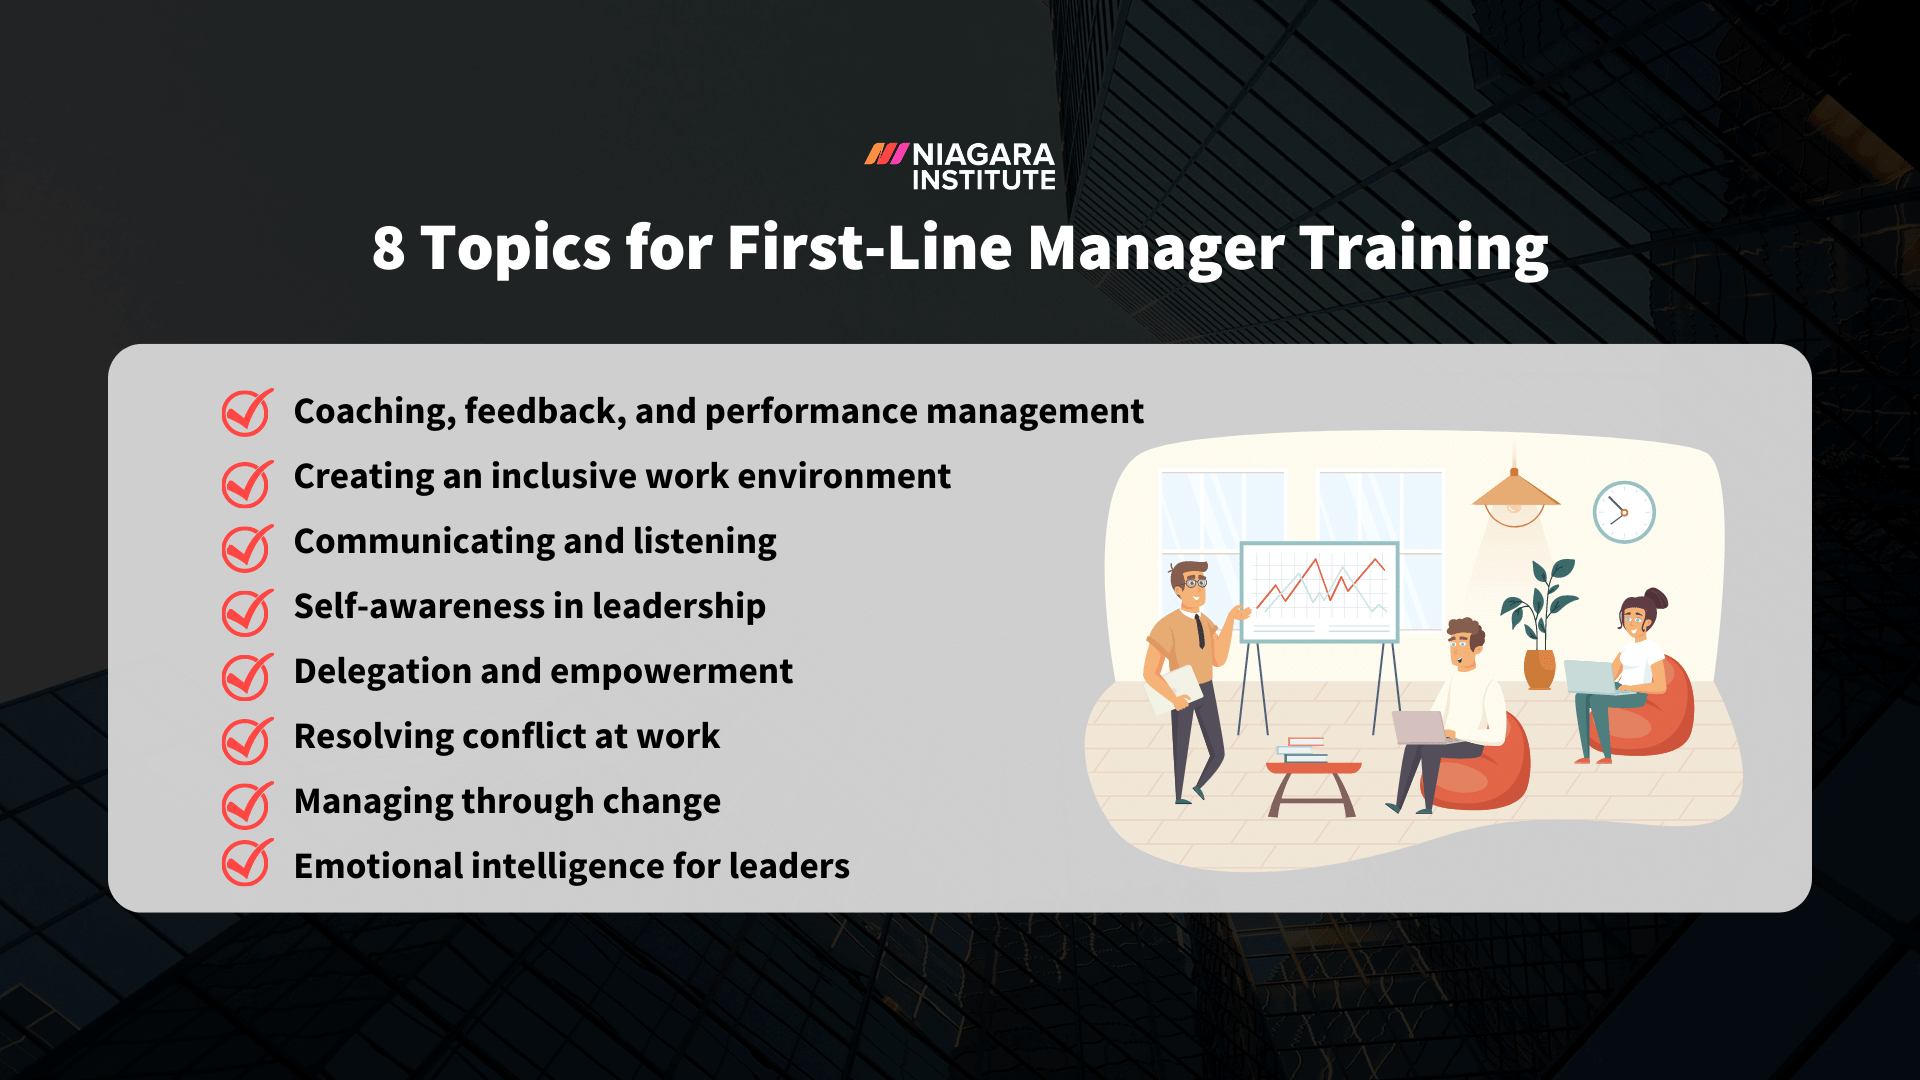 Topics for first-line manager training